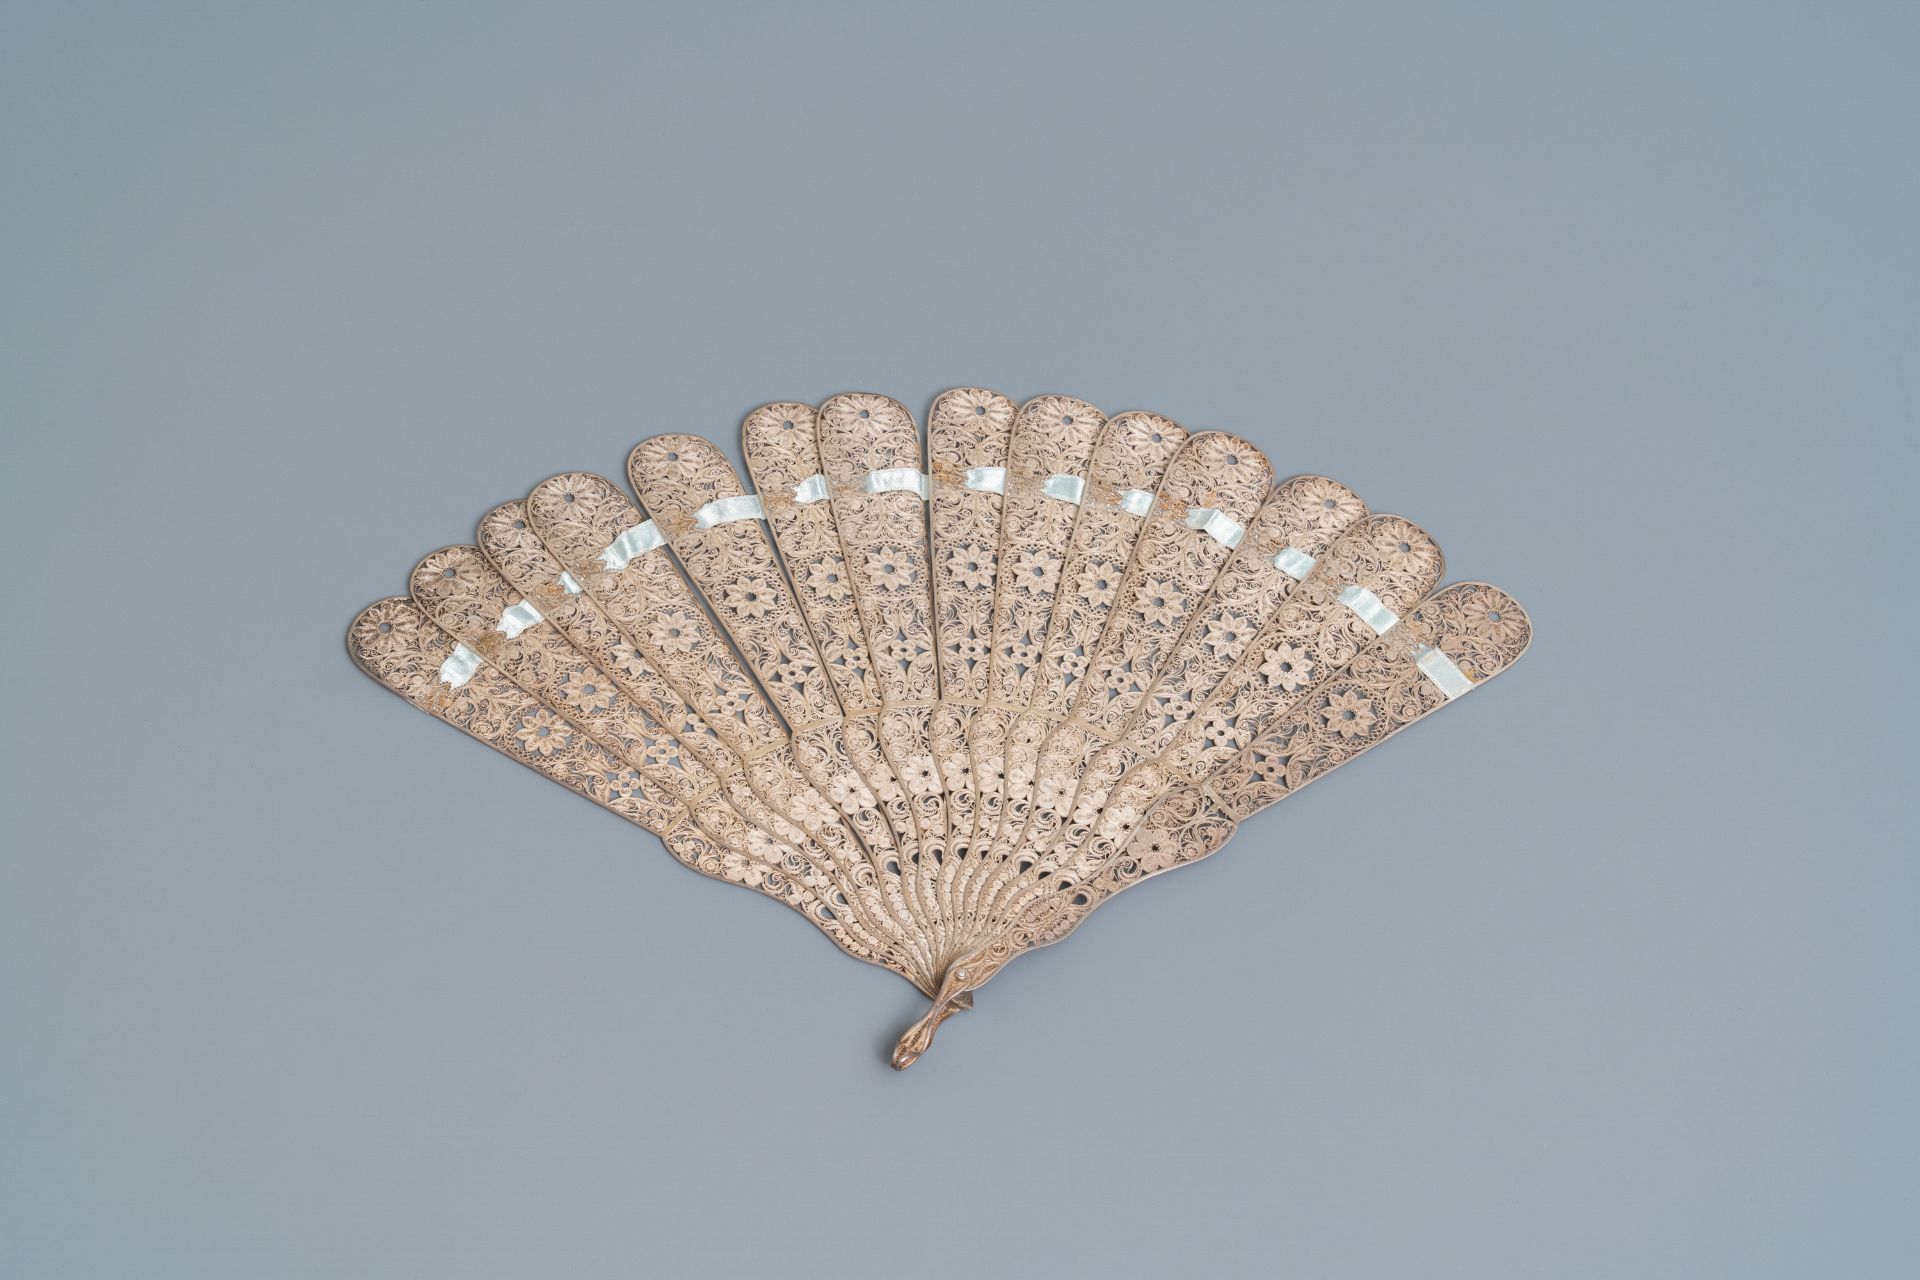 Two Chinese filigree and enamelled silver fans, 19th C. - Image 3 of 7